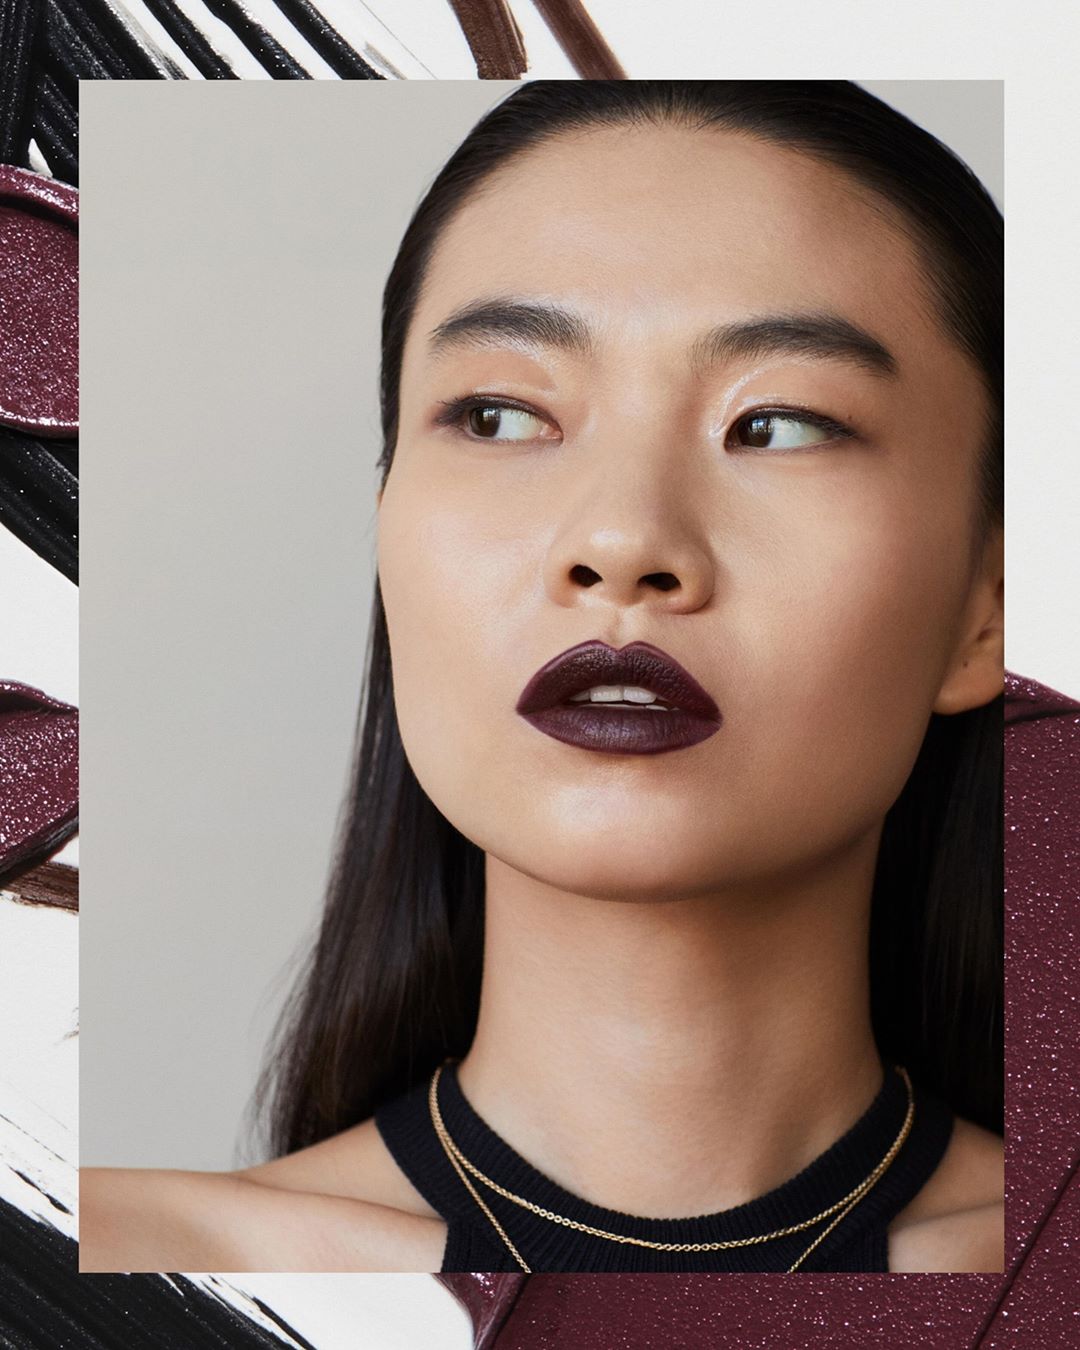 SHISEIDO - Our SHISEIDO muse is the epitome of extreme elegance. Challenge your artistry and transform your look using the products seen here: Eyelash Curler, ControlledChaos MascaraInk in Black Pulse...